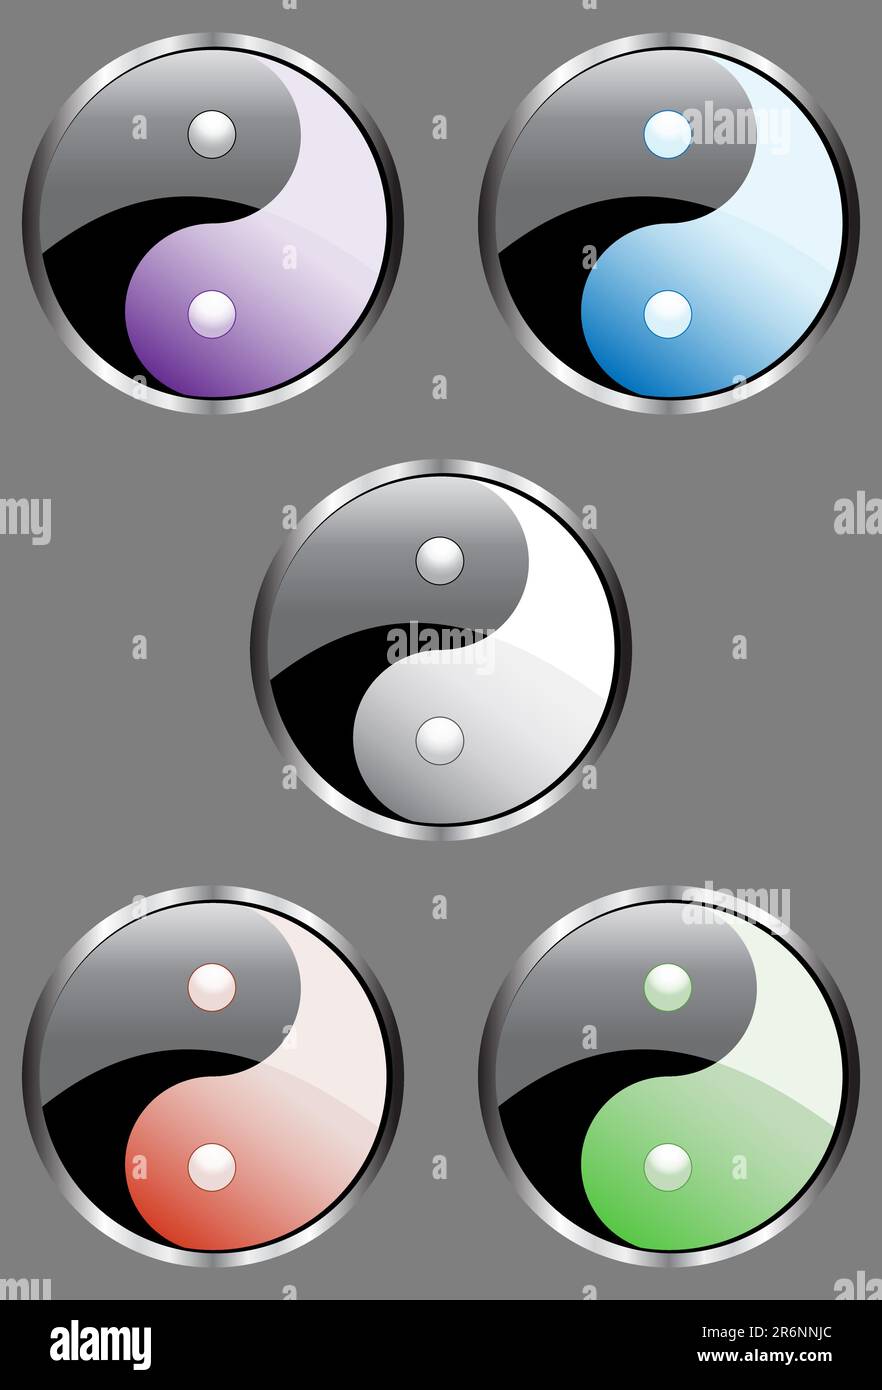 Set of 5 yin yang buttons. Stock Vector